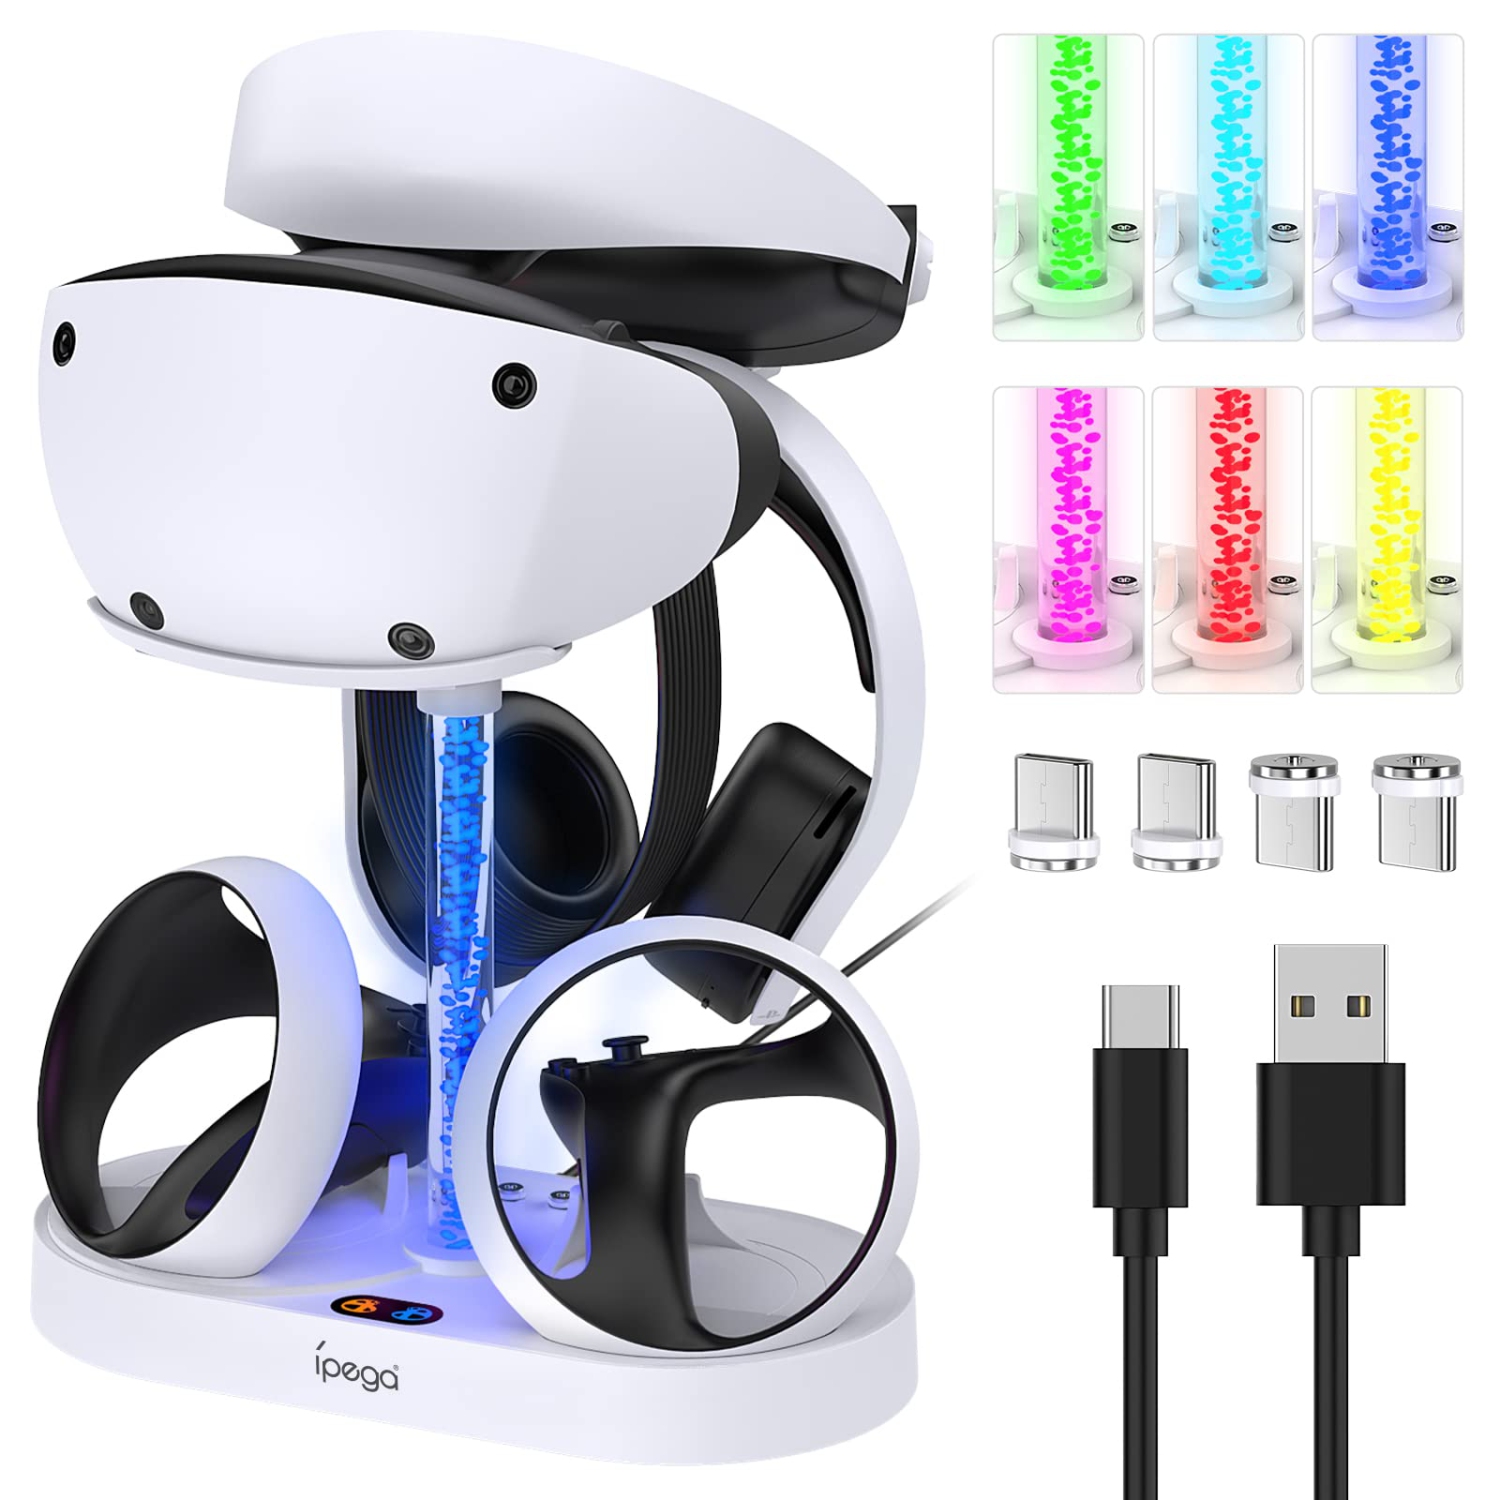 Charging Station for PS VR2 with RGB Light, GORIXER Vertical Charging Stand Dock Support for PlayStation VR2 Headset Display Accessories for PSFVR2 with 4 Type-C Magnetic Adapters